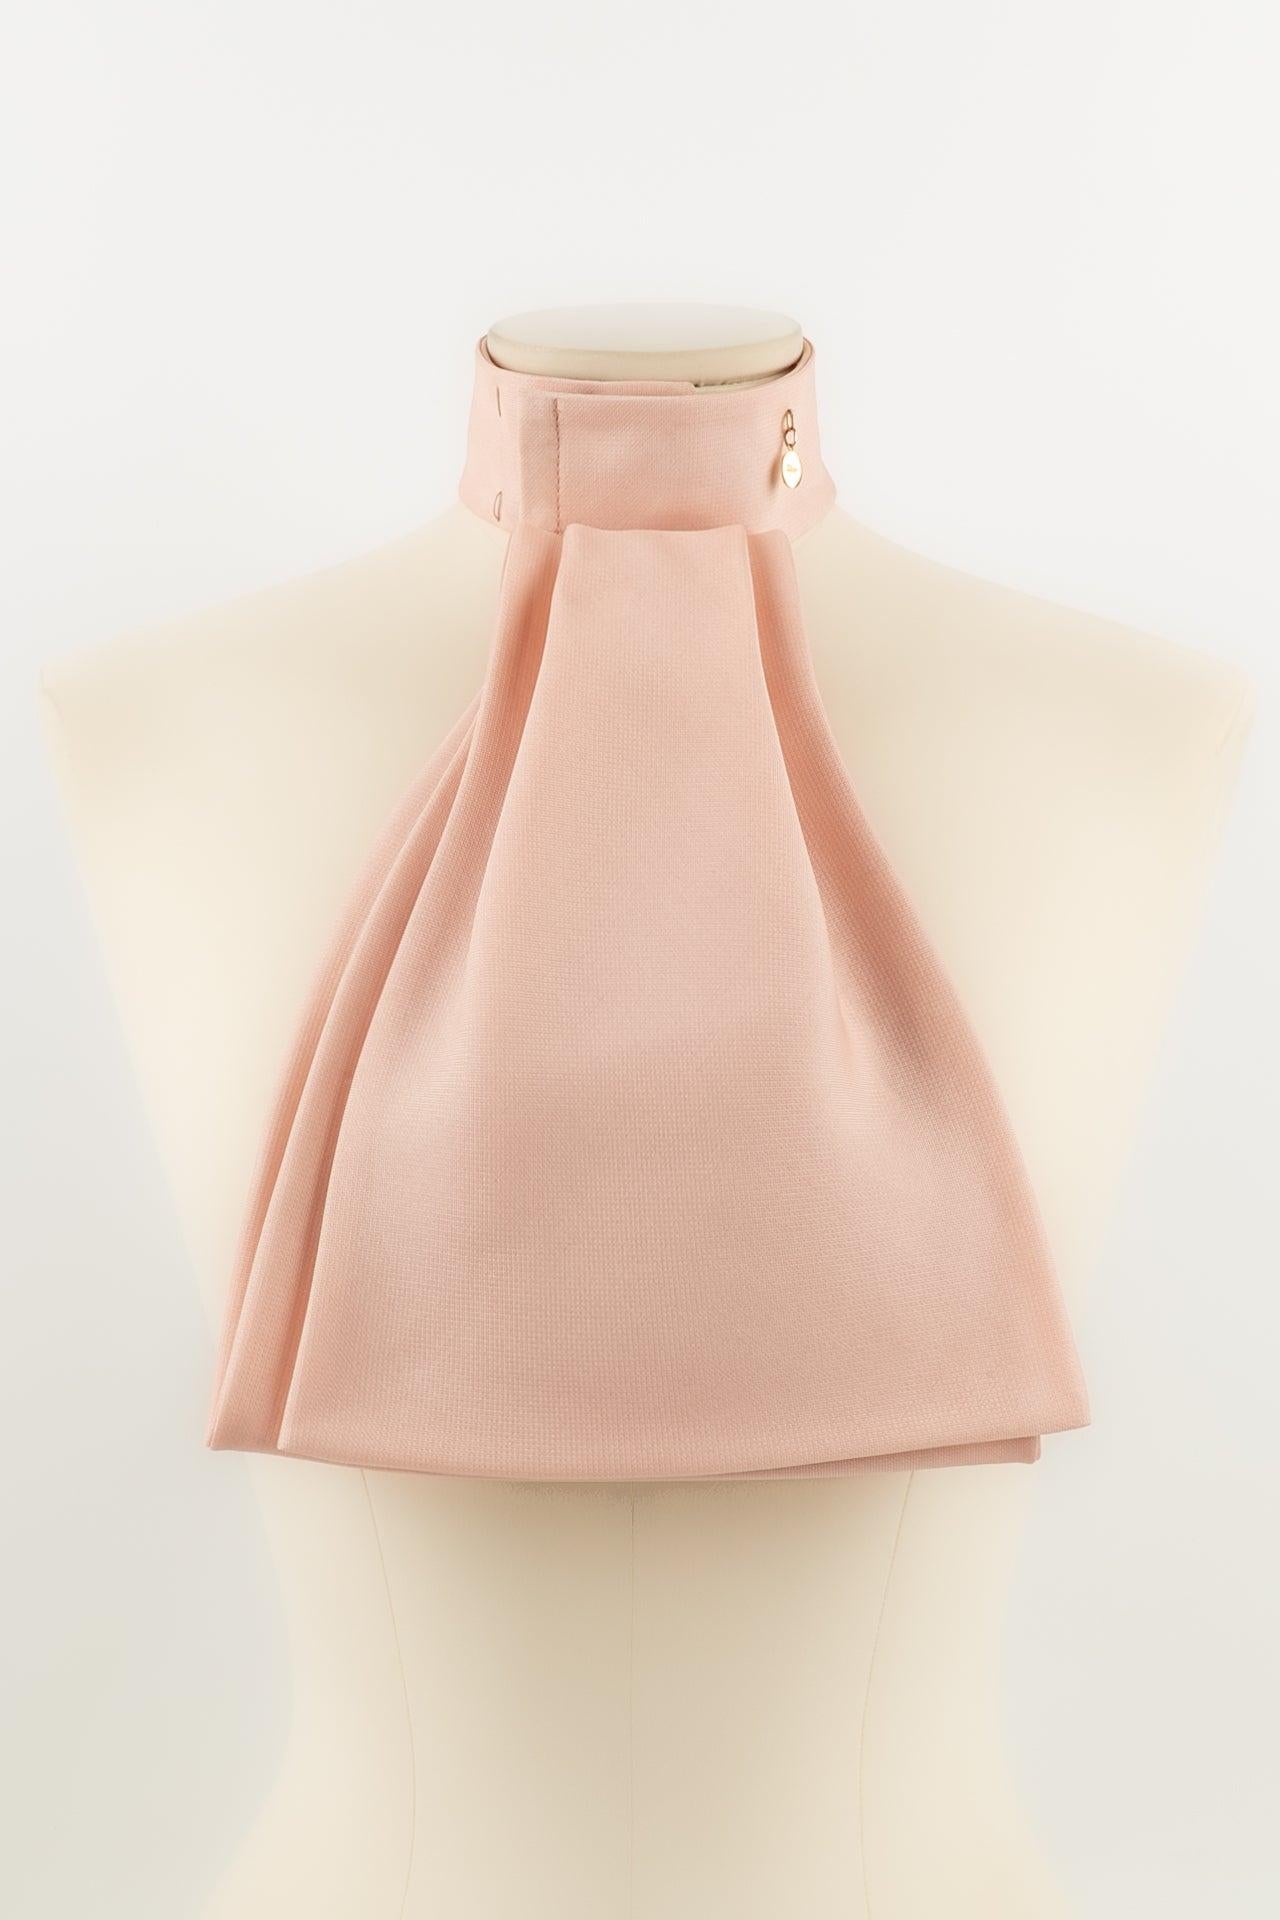 Dior - Pink silk ascot tie.

Additional information:
Dimensions: Height: 28 cm - Neck size: from 32.5 cm to 35.5 cm
Condition: Very good condition
Seller Ref number: ACC23